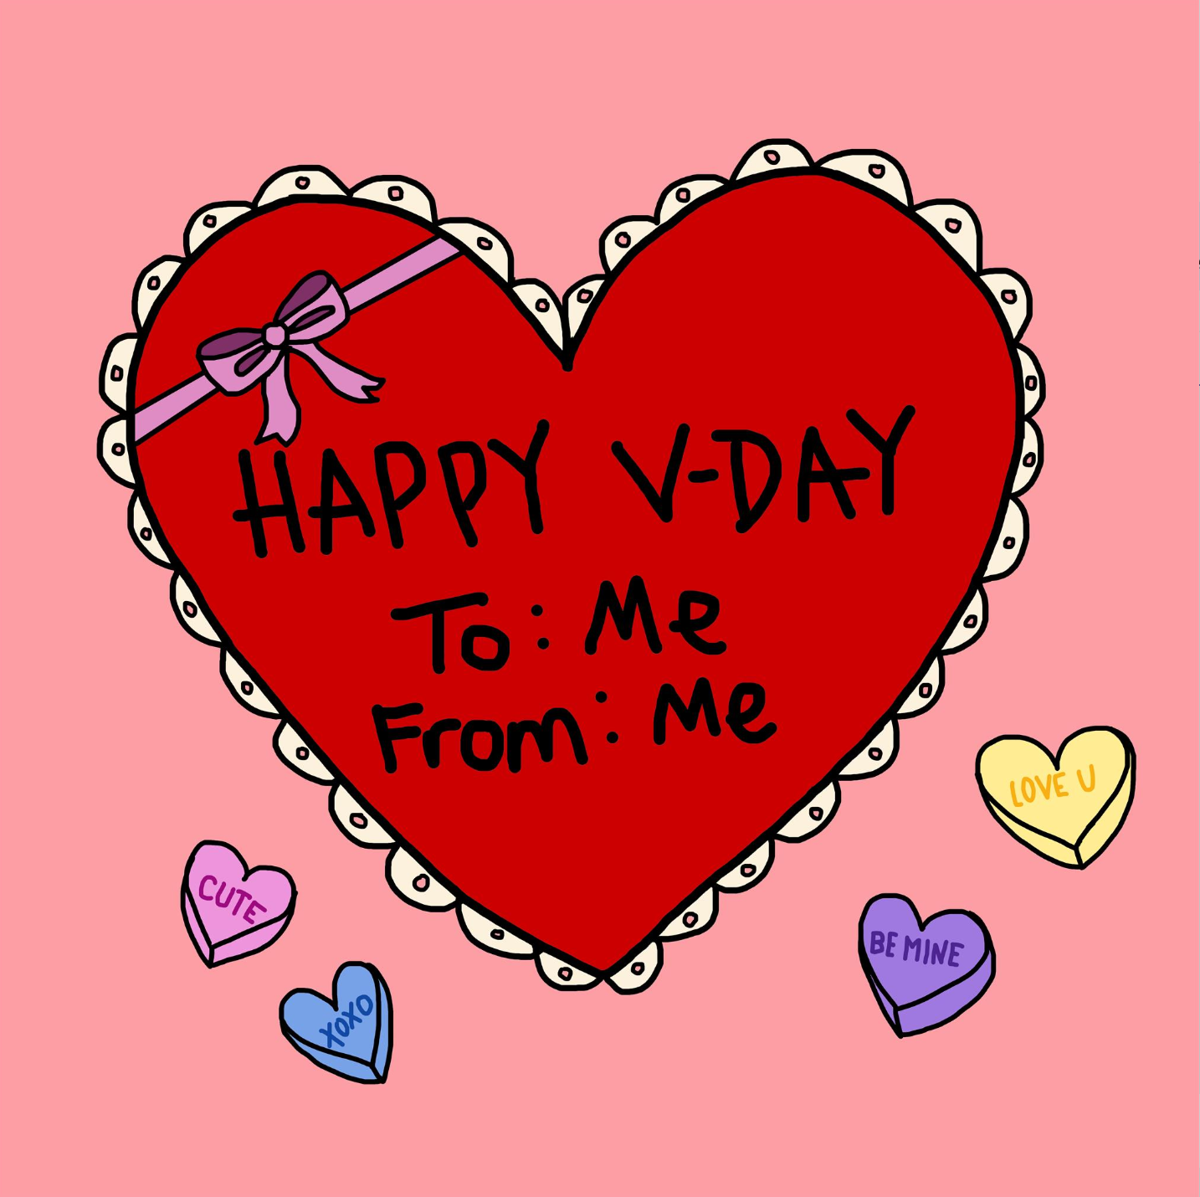 A day of self-love: Taking advantage of Feb. 14 | Opinion ...